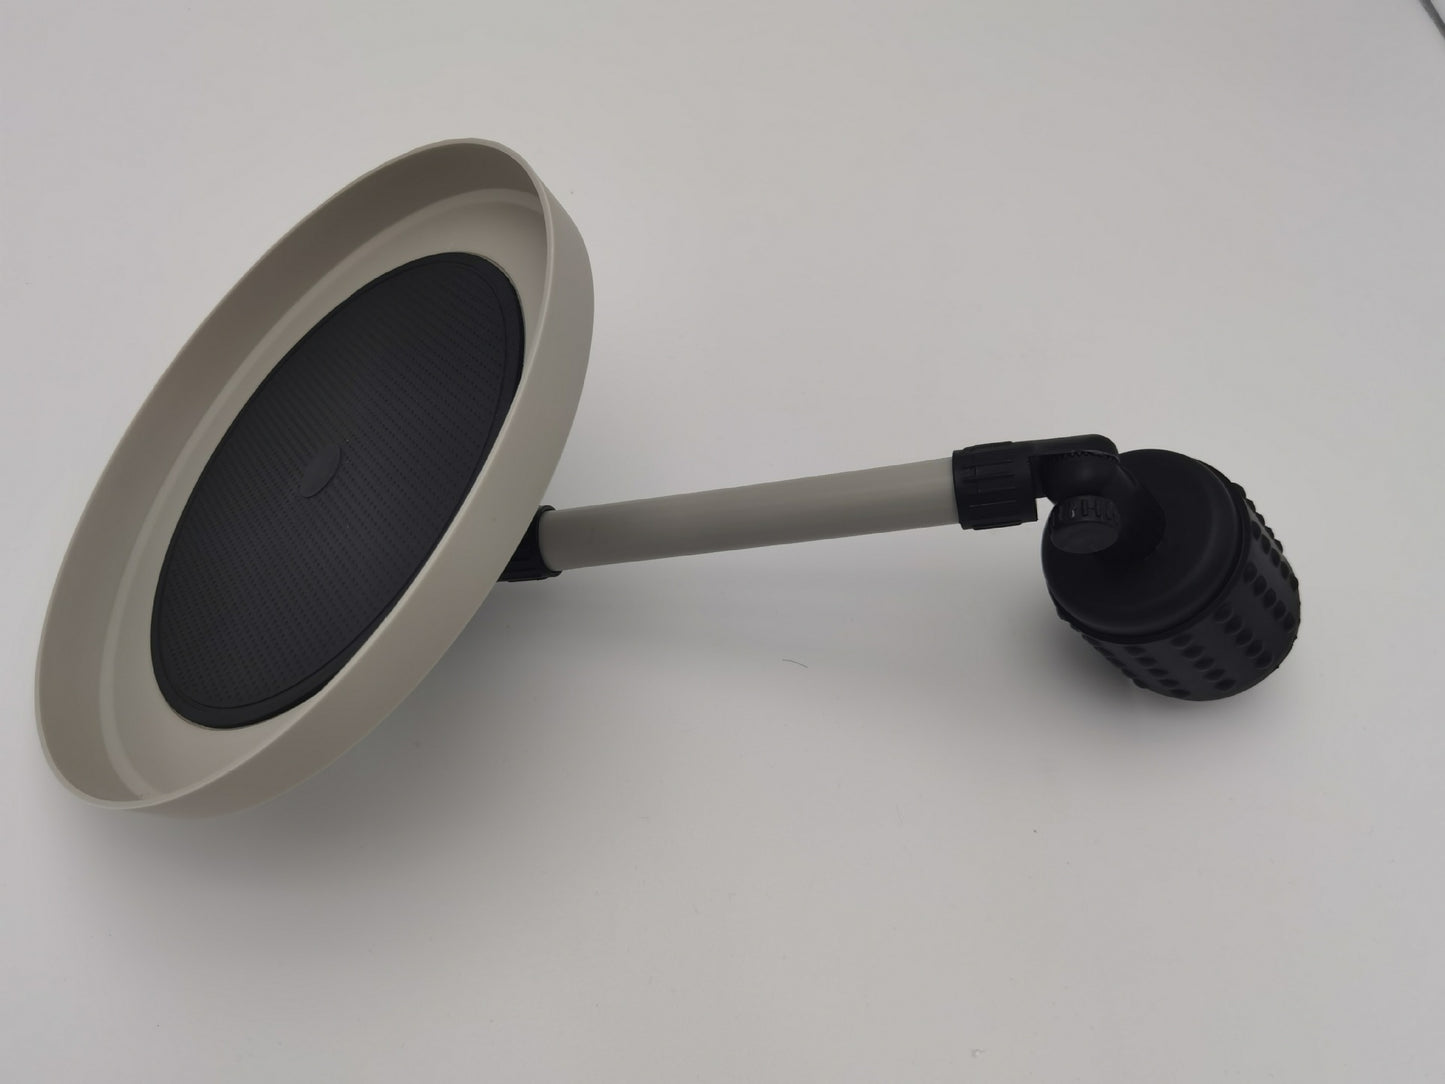 "Revolutionize Your Commute with our 360-Degree Rotation Car Tray Holder!